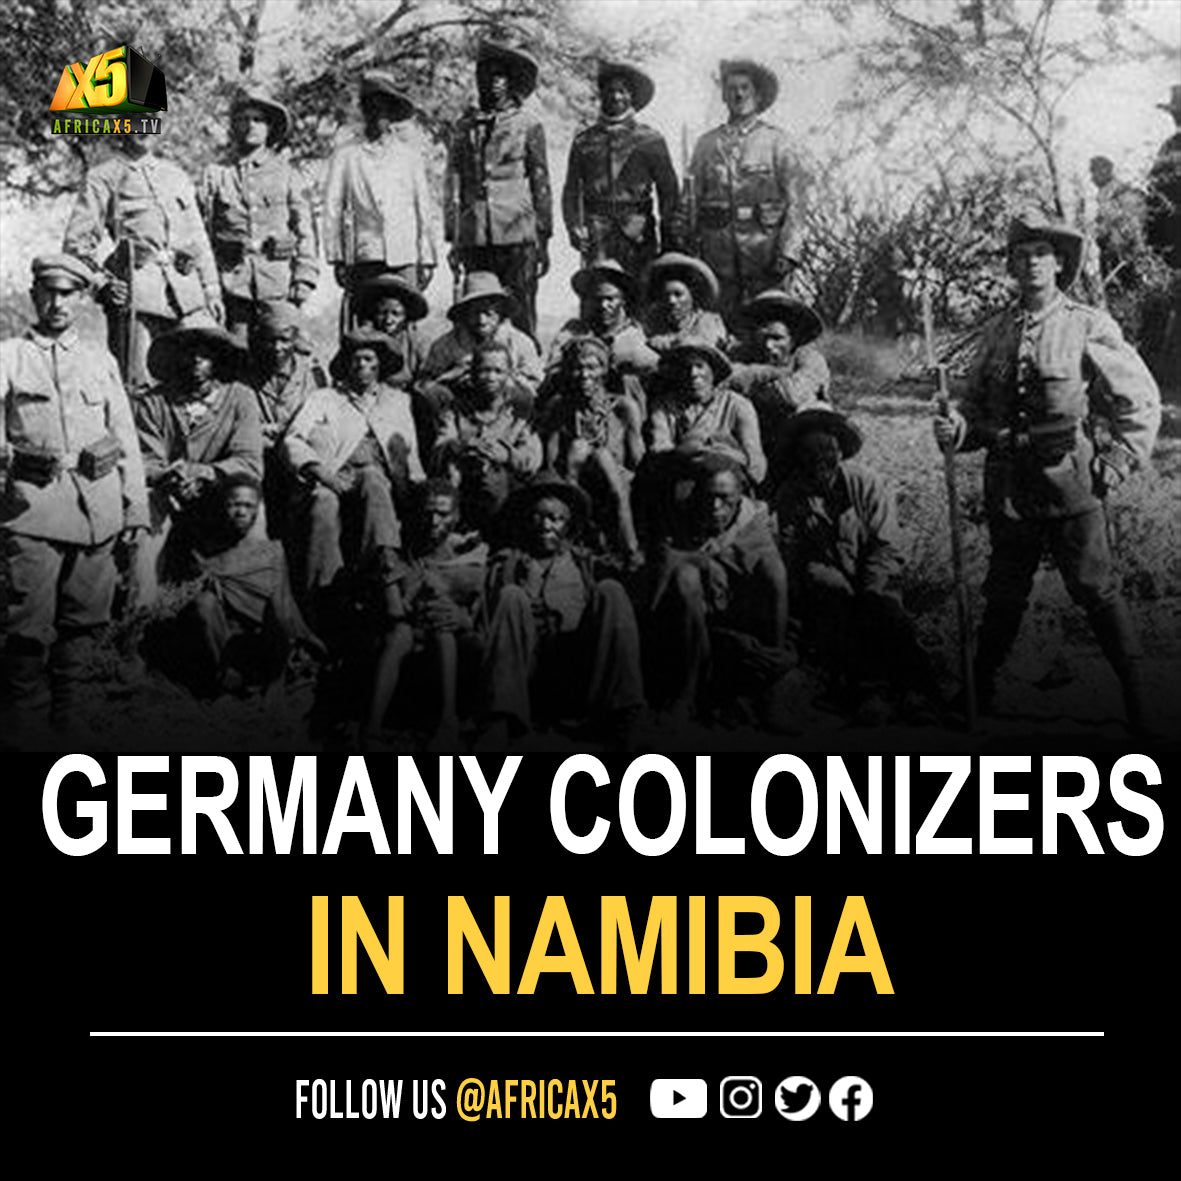 German colonizers in Namibia, due to their interest in evolutionary theory & missing links executed inmates and decapitated them.